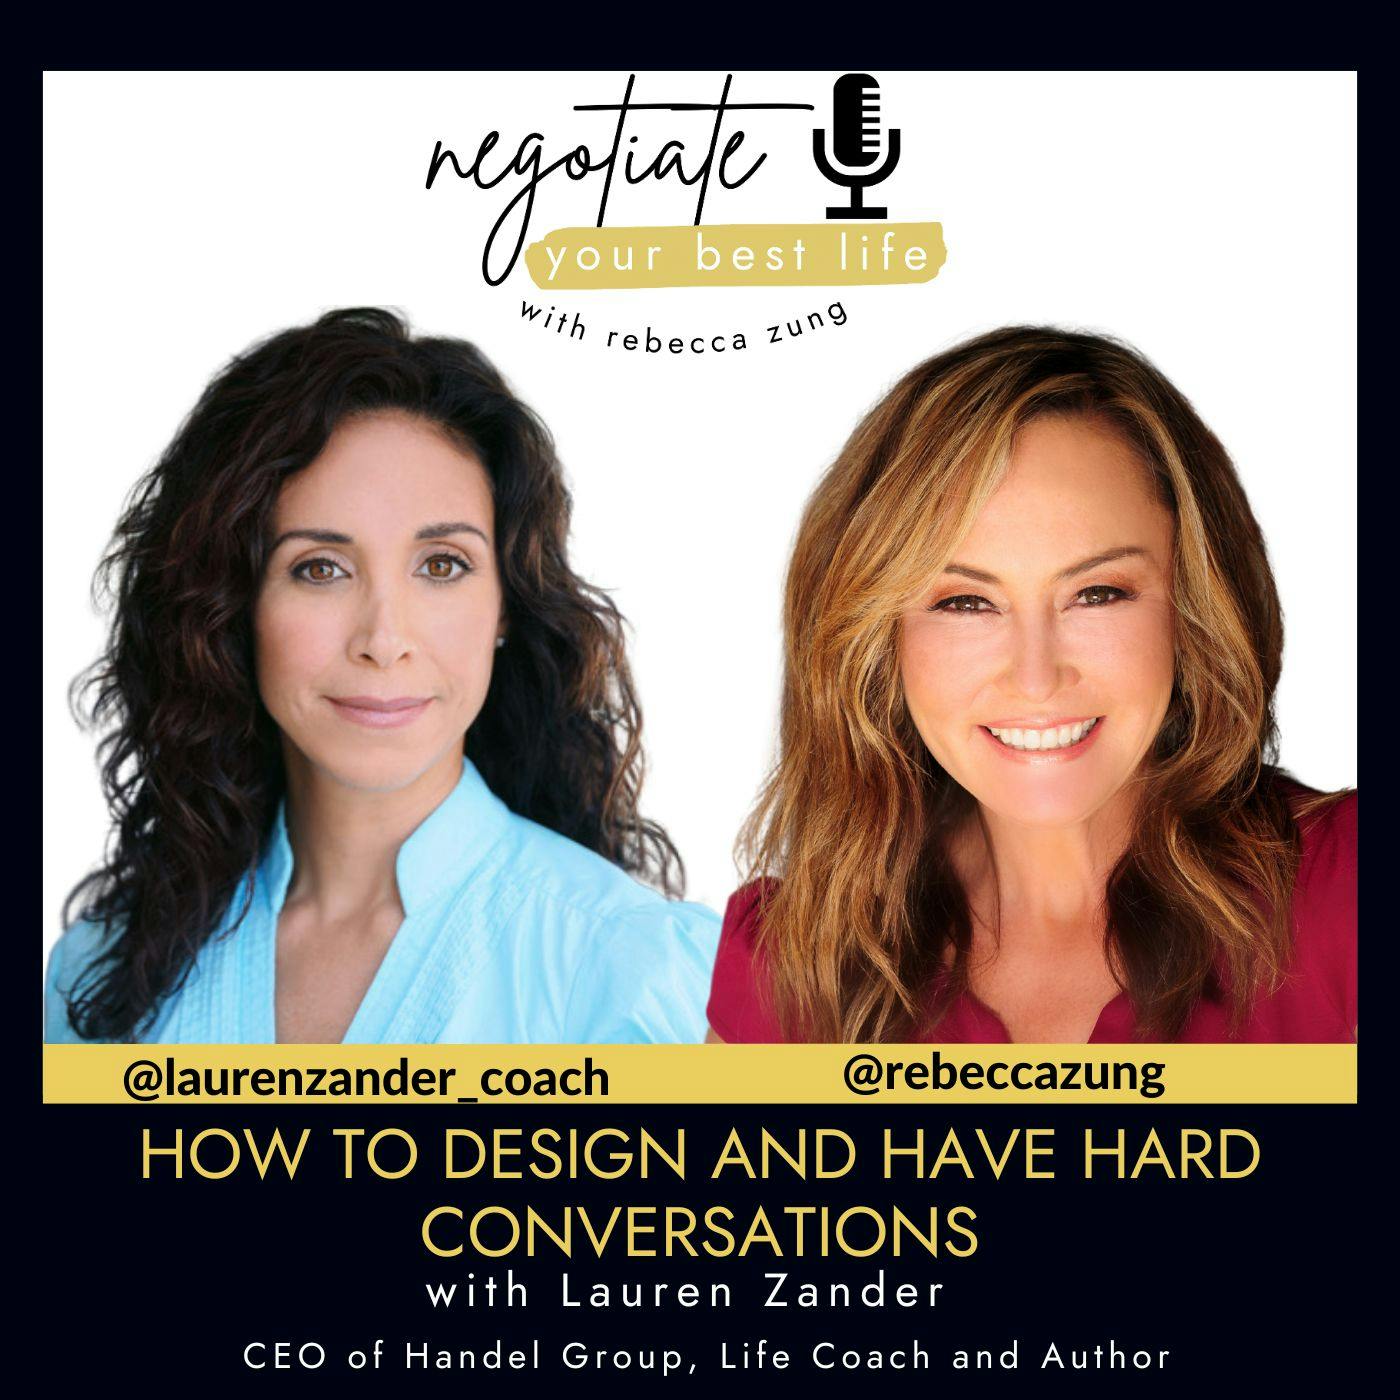 How to Design and Have Hard Conversations with Guest Lauren Zander & Rebecca Zung on Negotiate Your Best Life #518